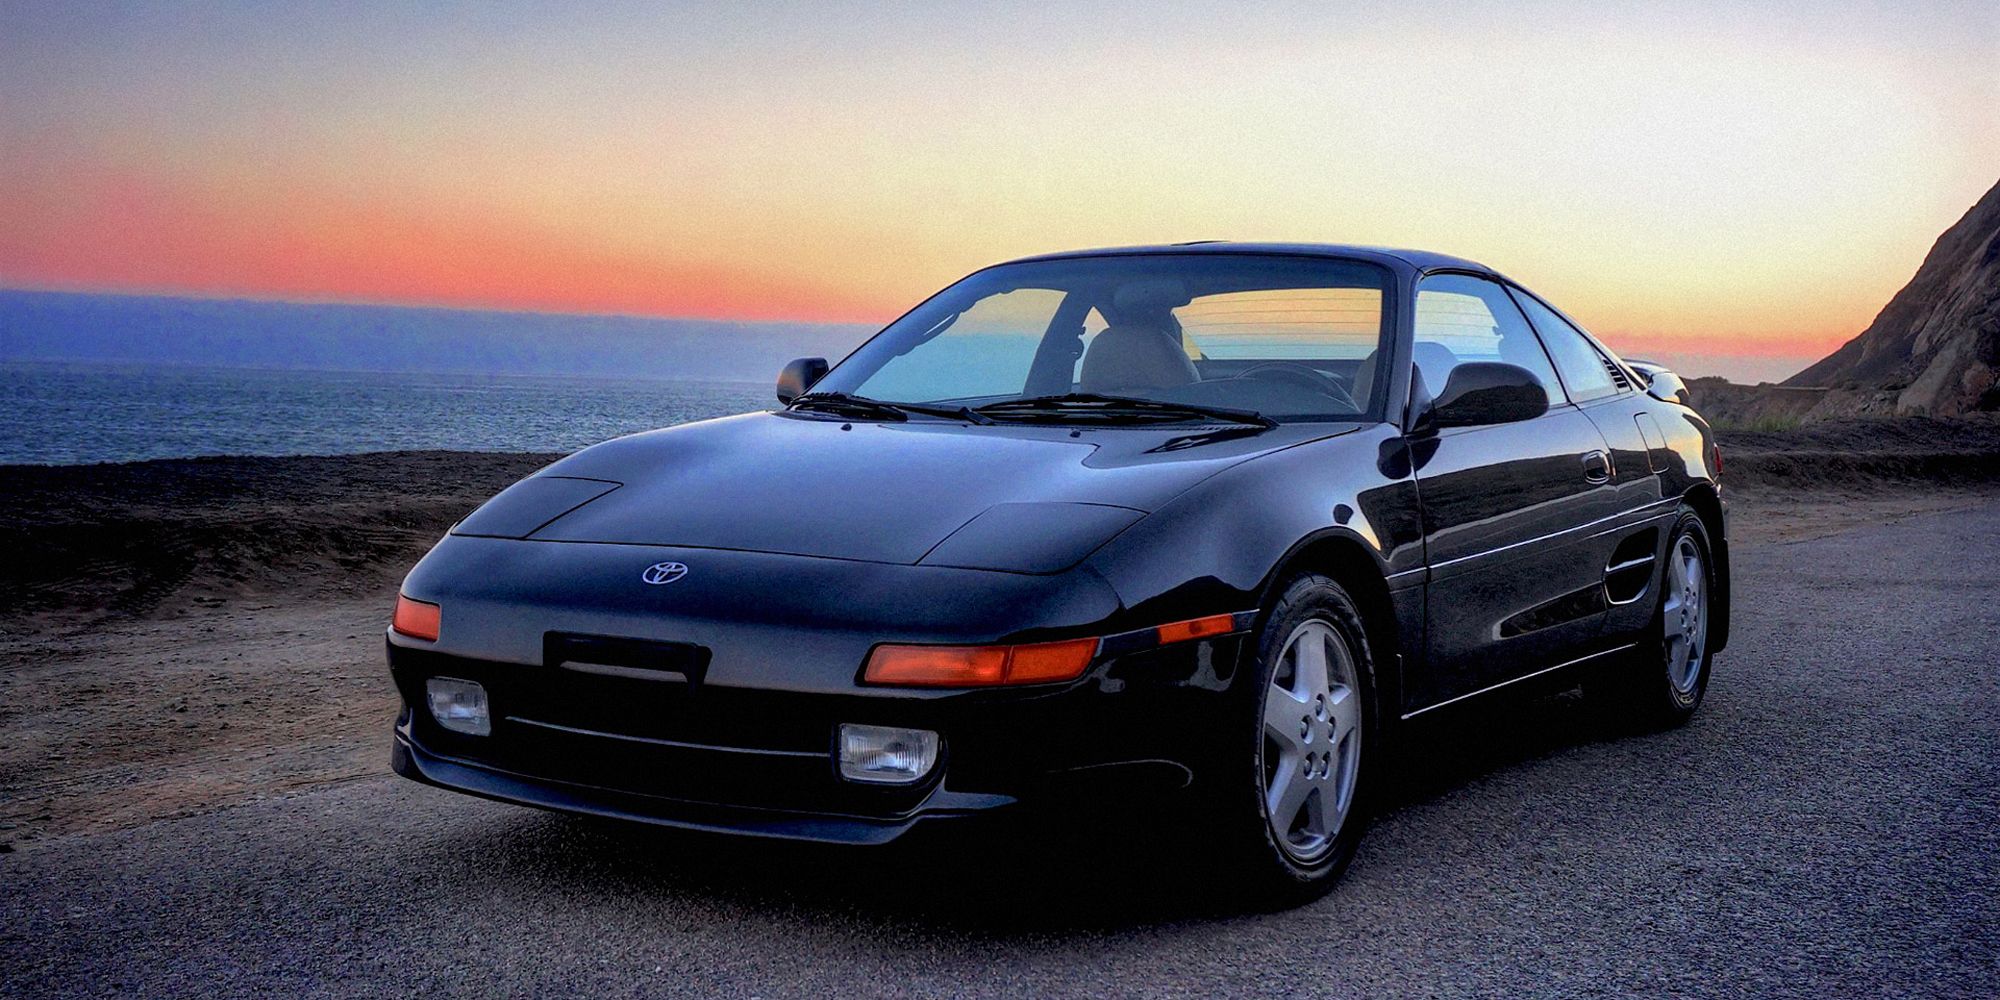 The front of a black SW20 MR2